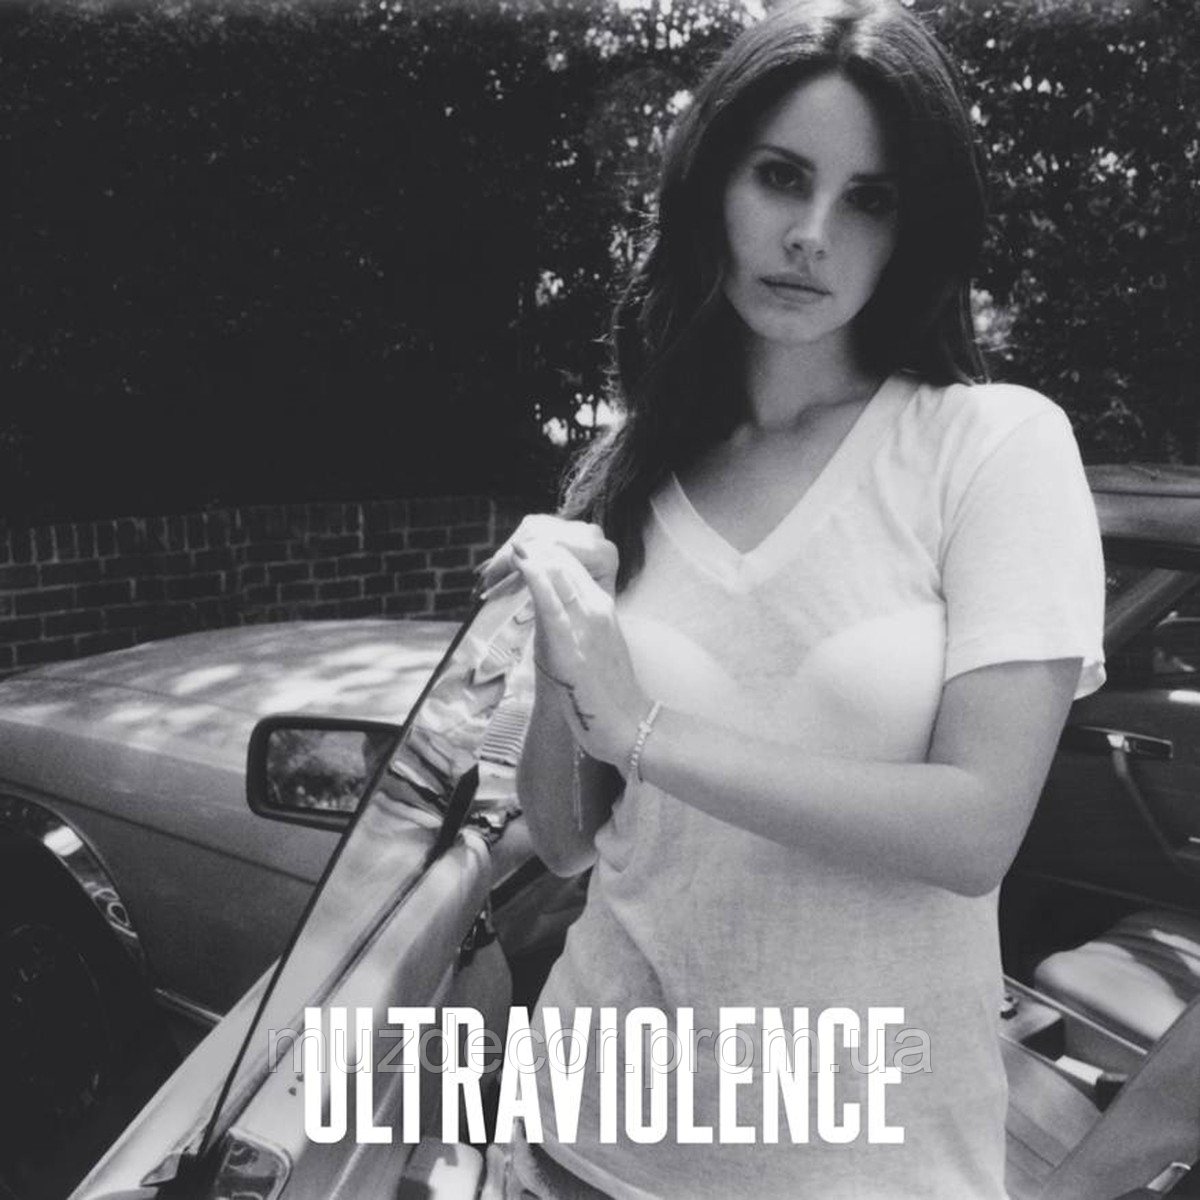 Lana Del Rey - Ultraviolence (Limited Deluxe Edition) - 2014, AUDIO CD (cd-r)